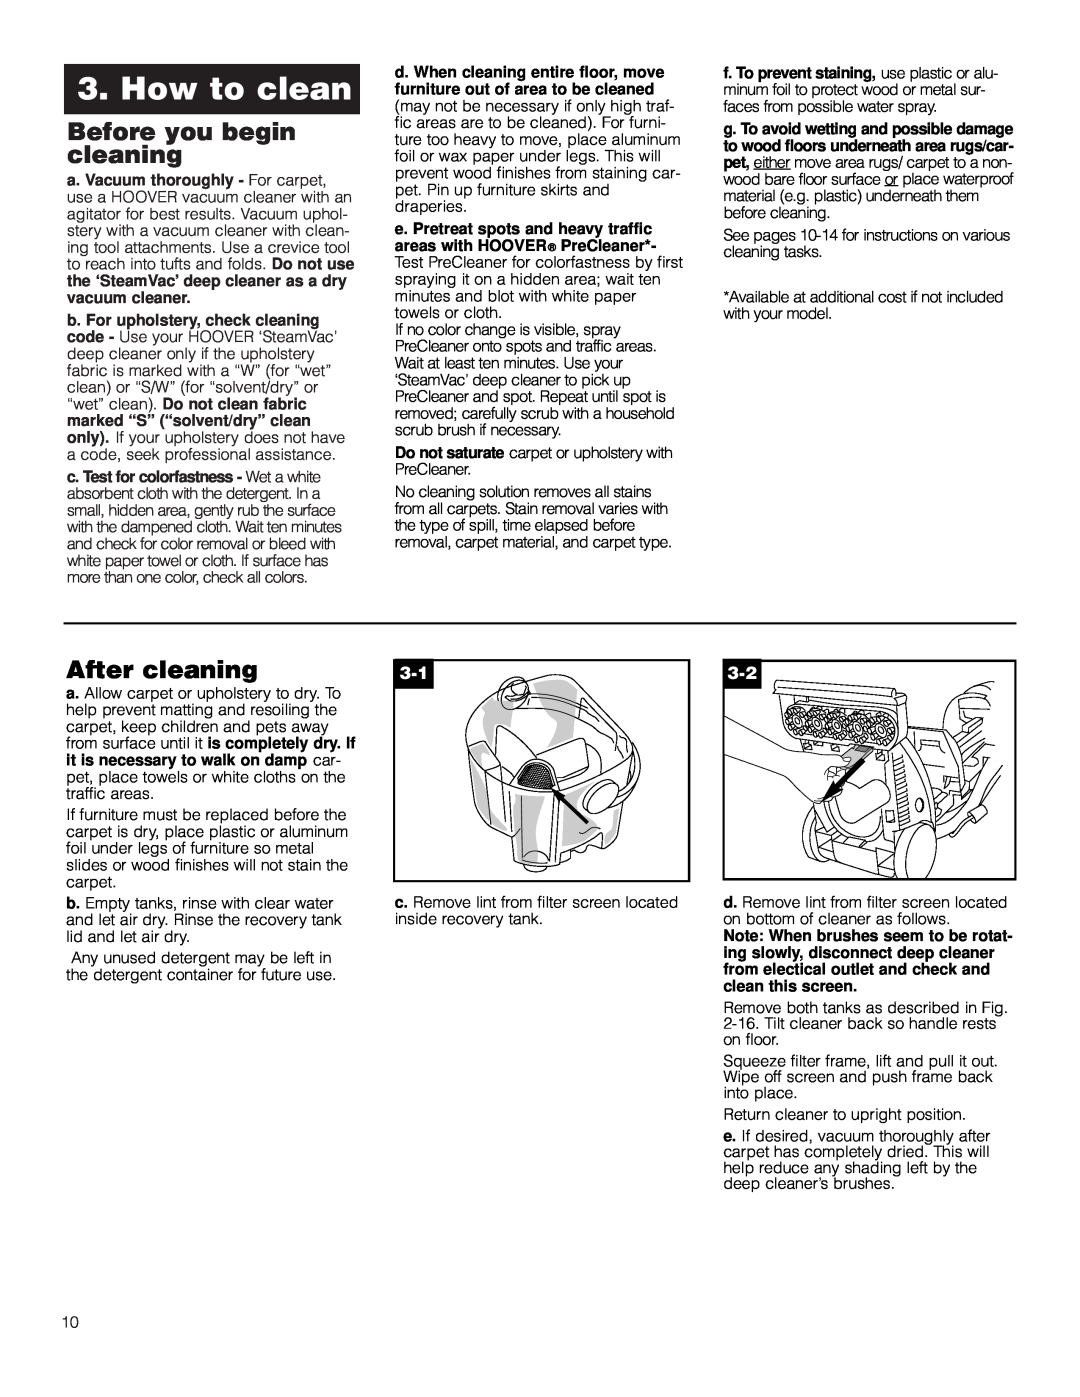 Hoover Deep Cleaner Steam Vacuum manual How to clean, Before you begin cleaning, After cleaning 